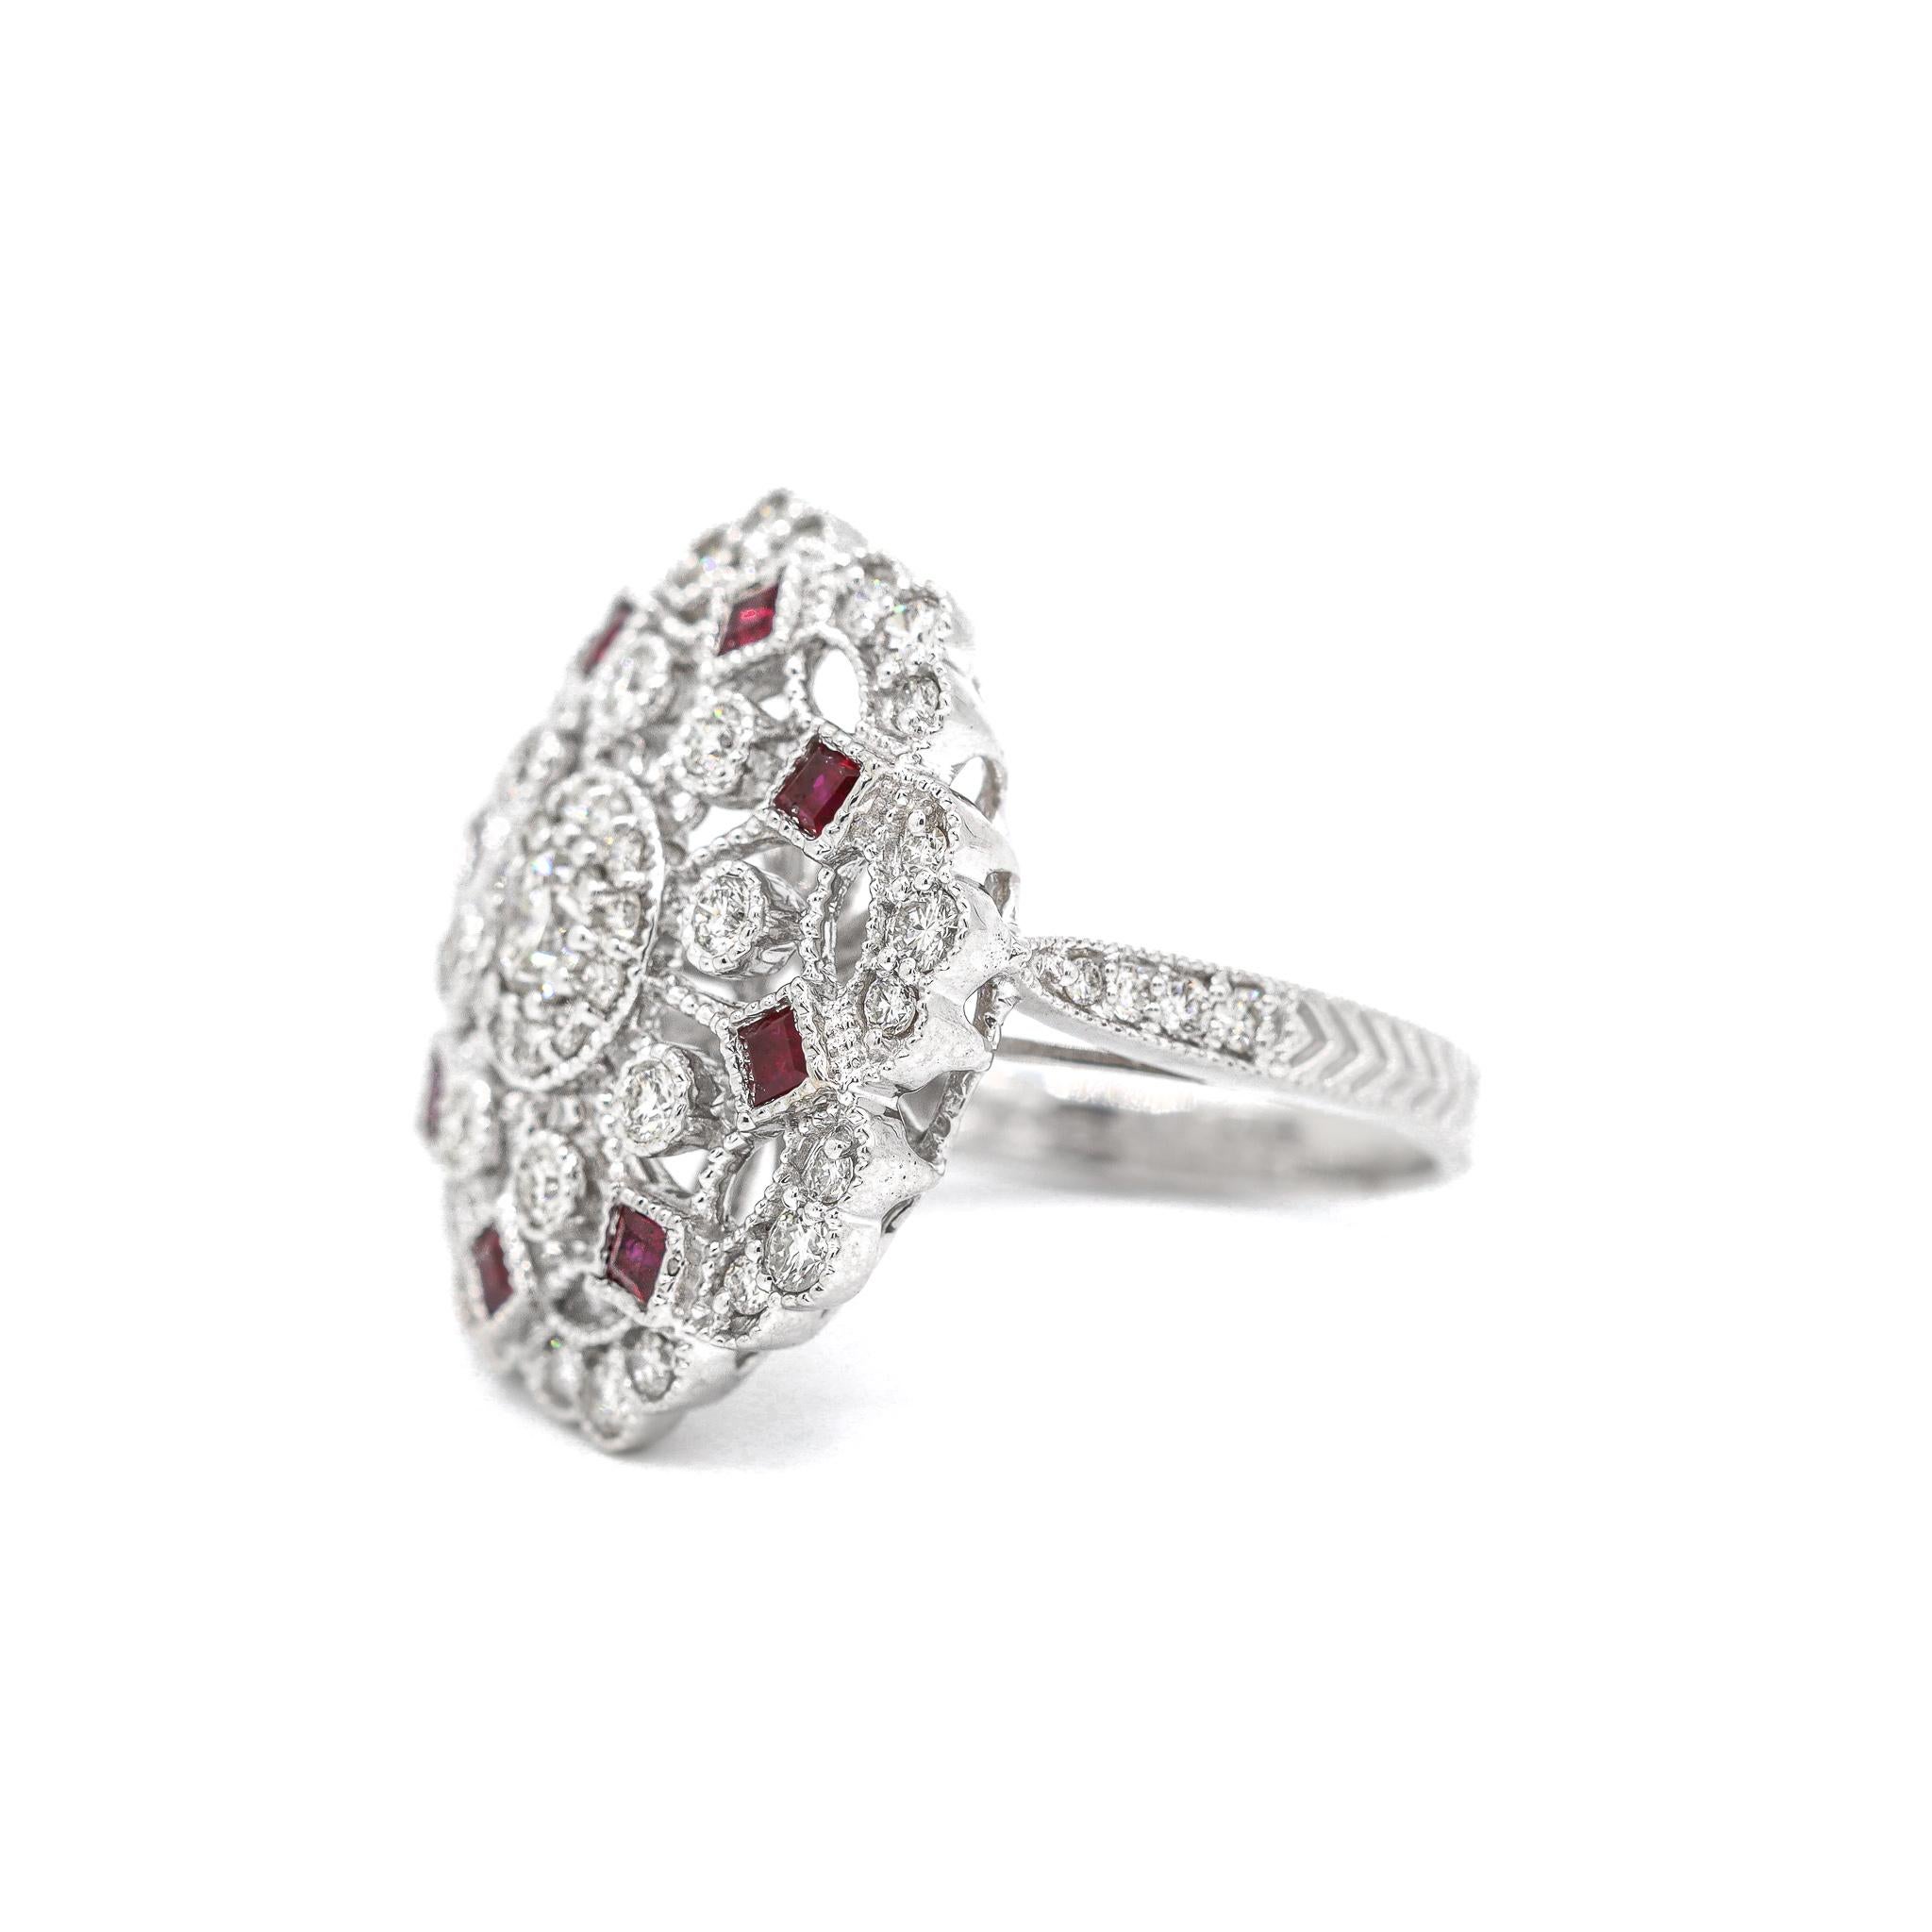 One lady's custom made polished, textured rhodium plated 14K white gold, diamond and ruby cluster, cocktail, fashion, vintage, halo ring with a half round shank. The ring is a size 7.25. The ring weighs a total of 9.20 grams., In new